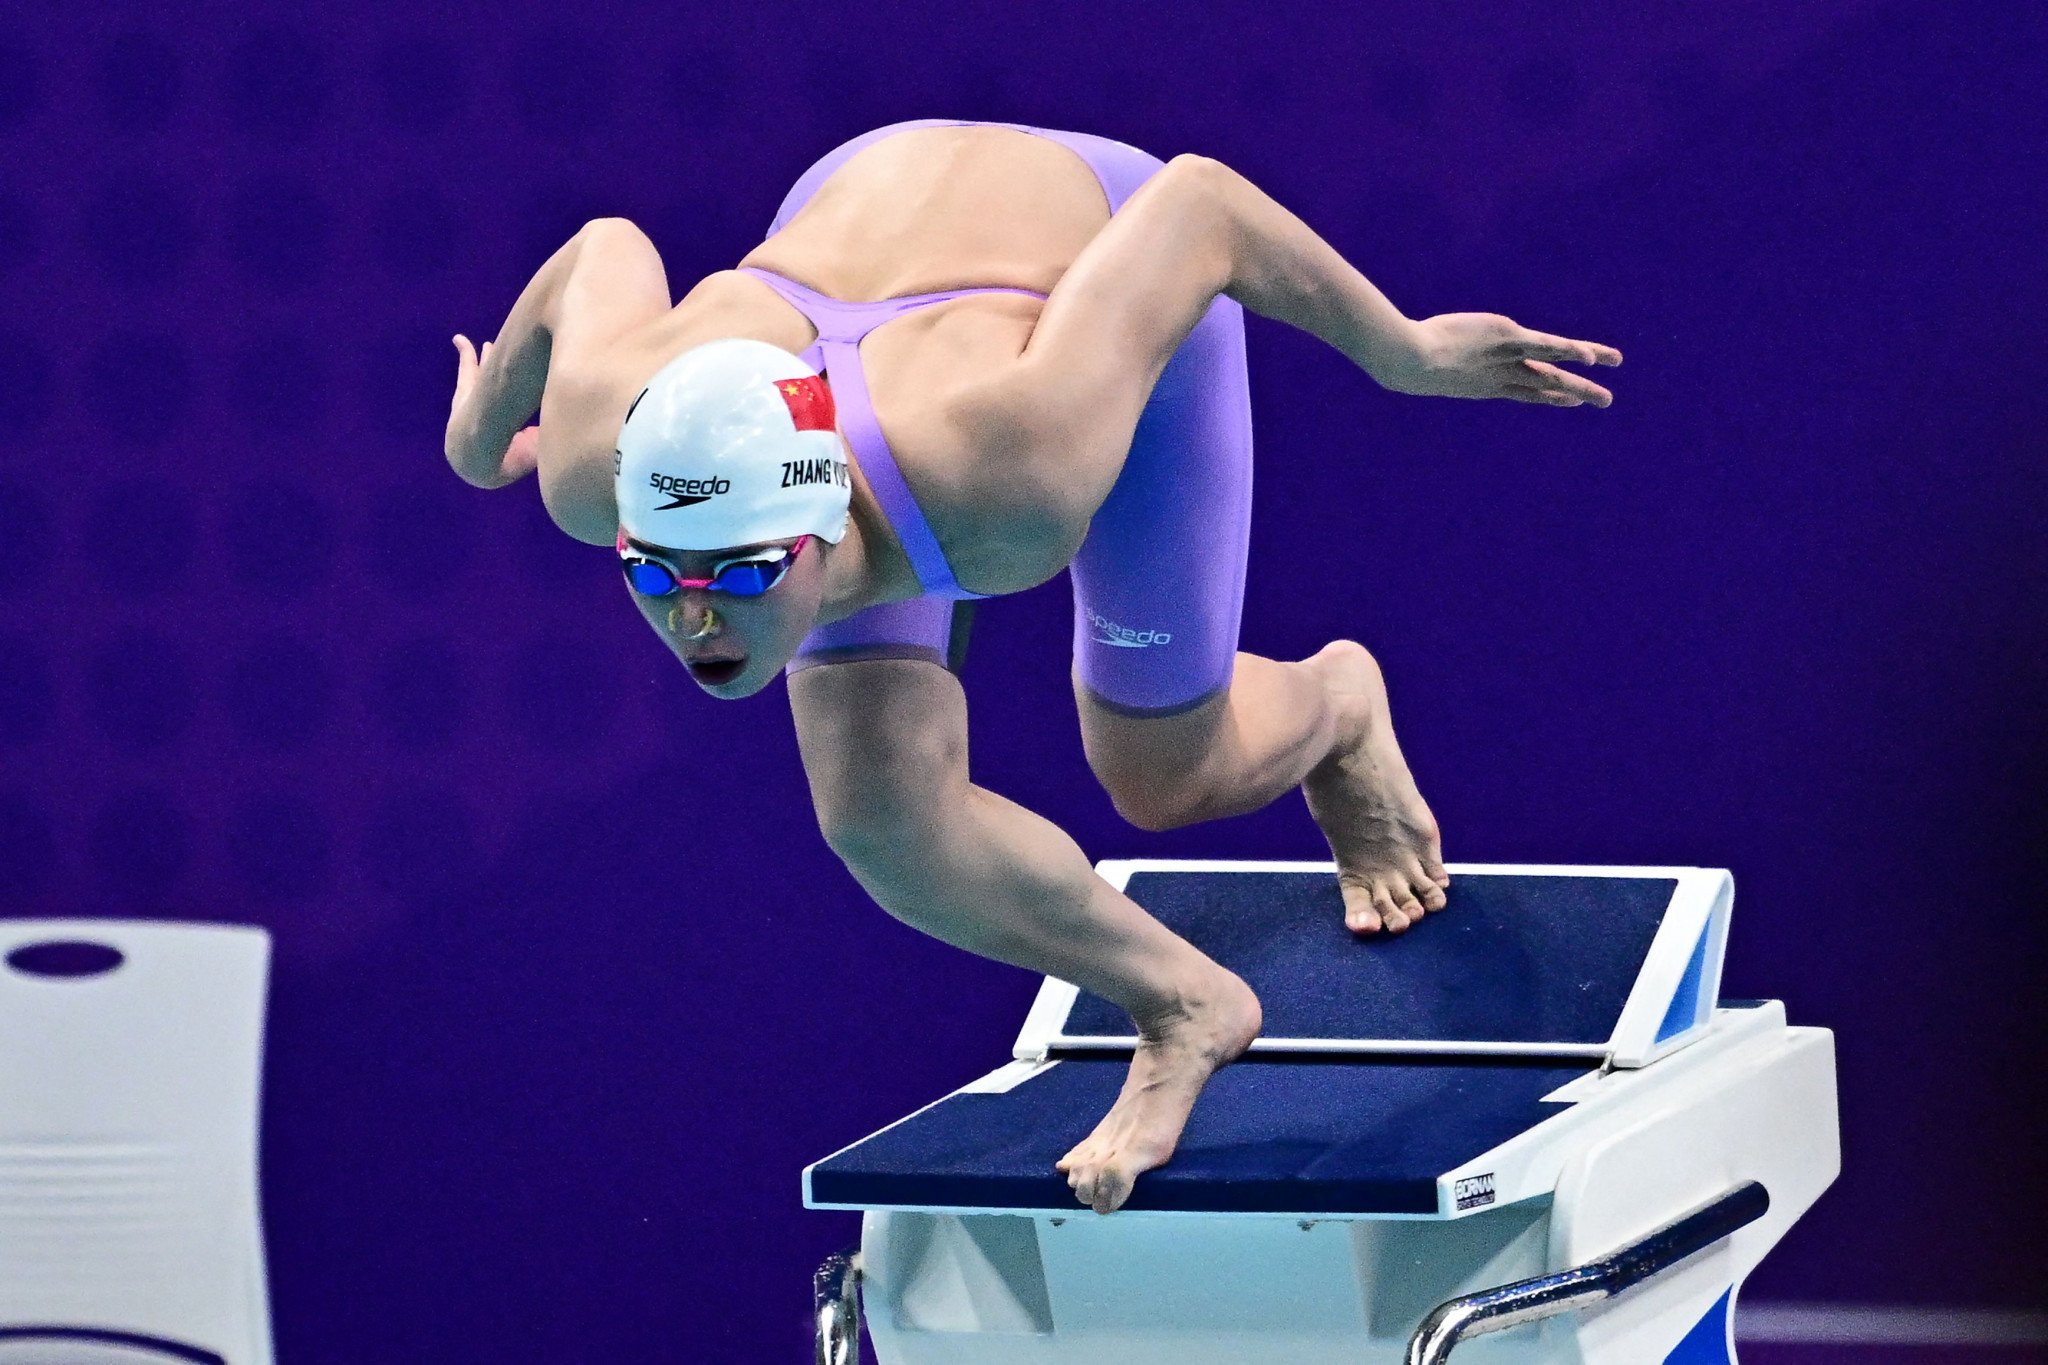 Zhang Yufei won her fifth gold medal of Hangzhou 2022, to become the most decorated so far ©Getty Images